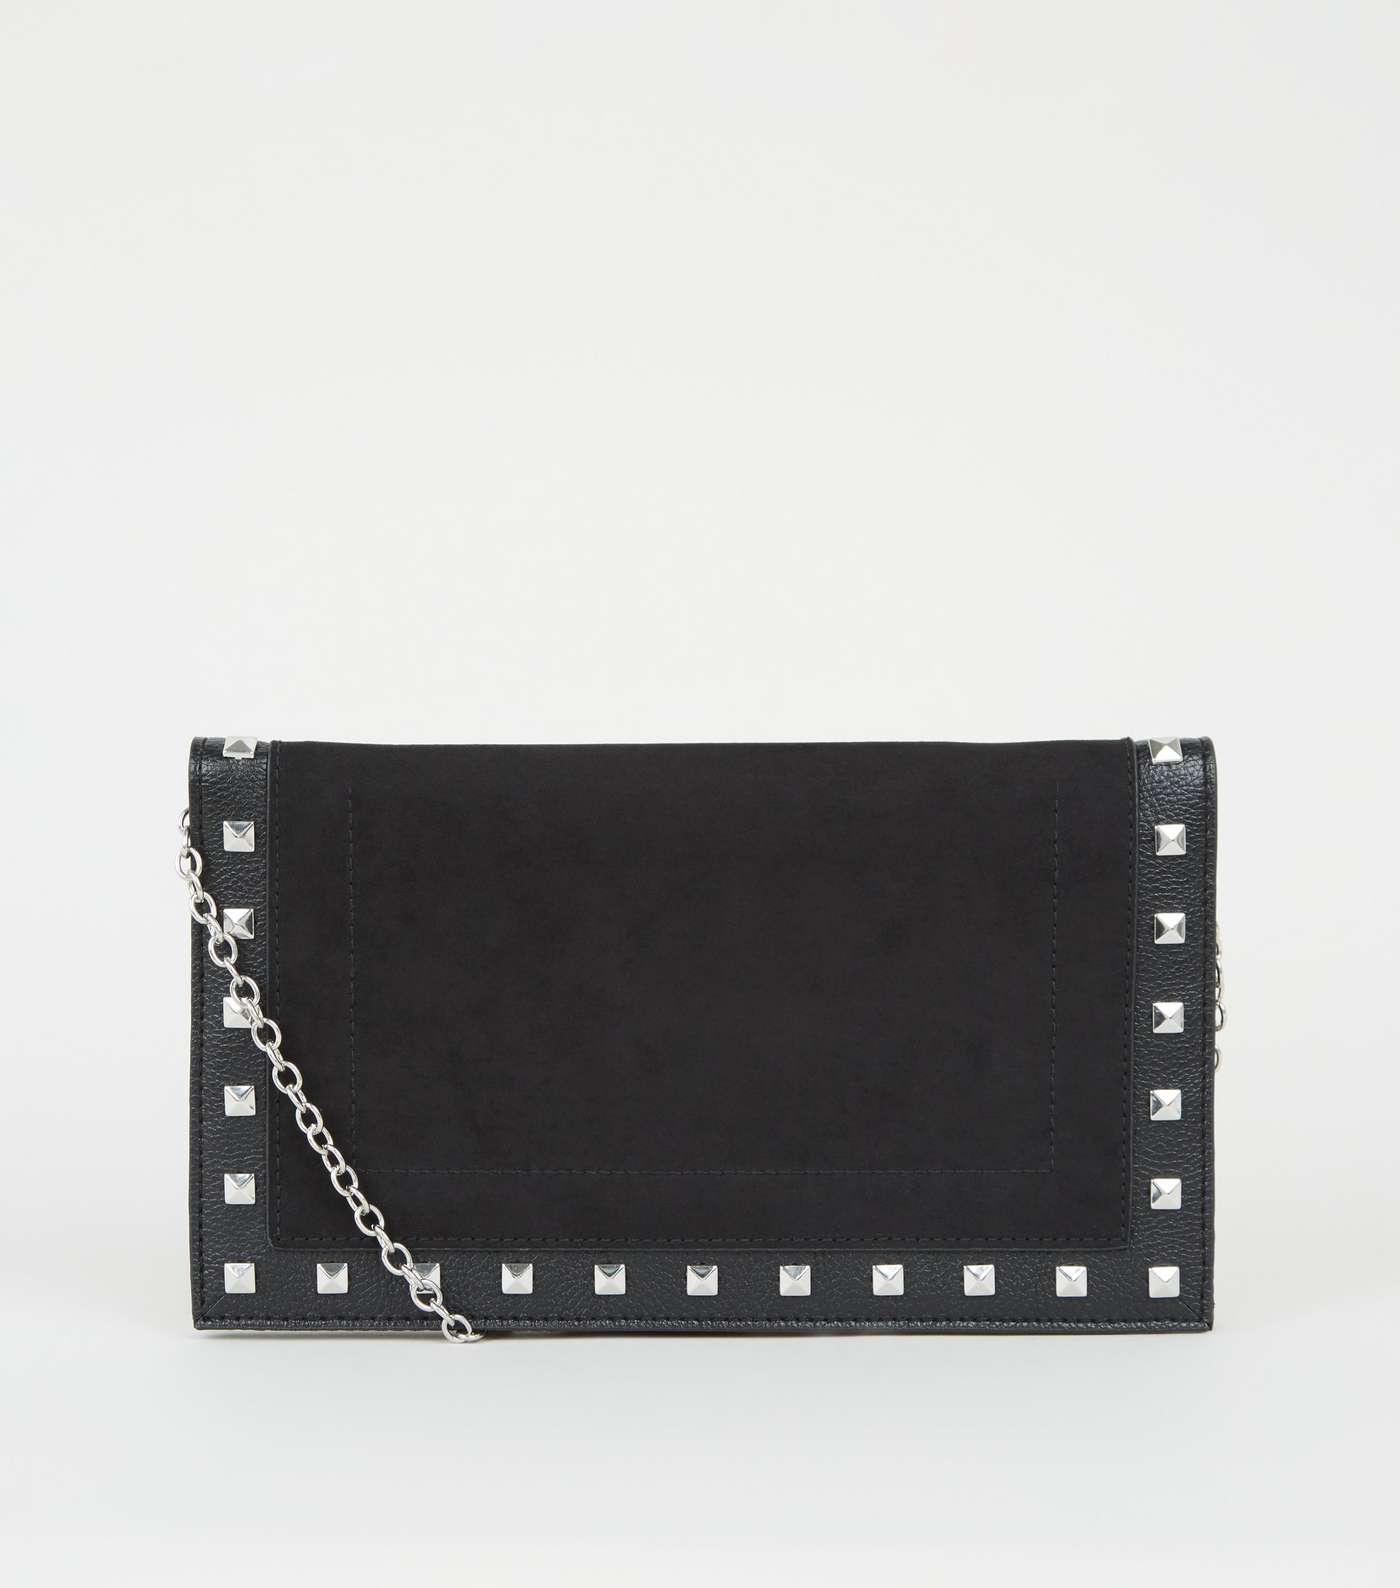 Black Leather-Look and Suedette Studded Clutch